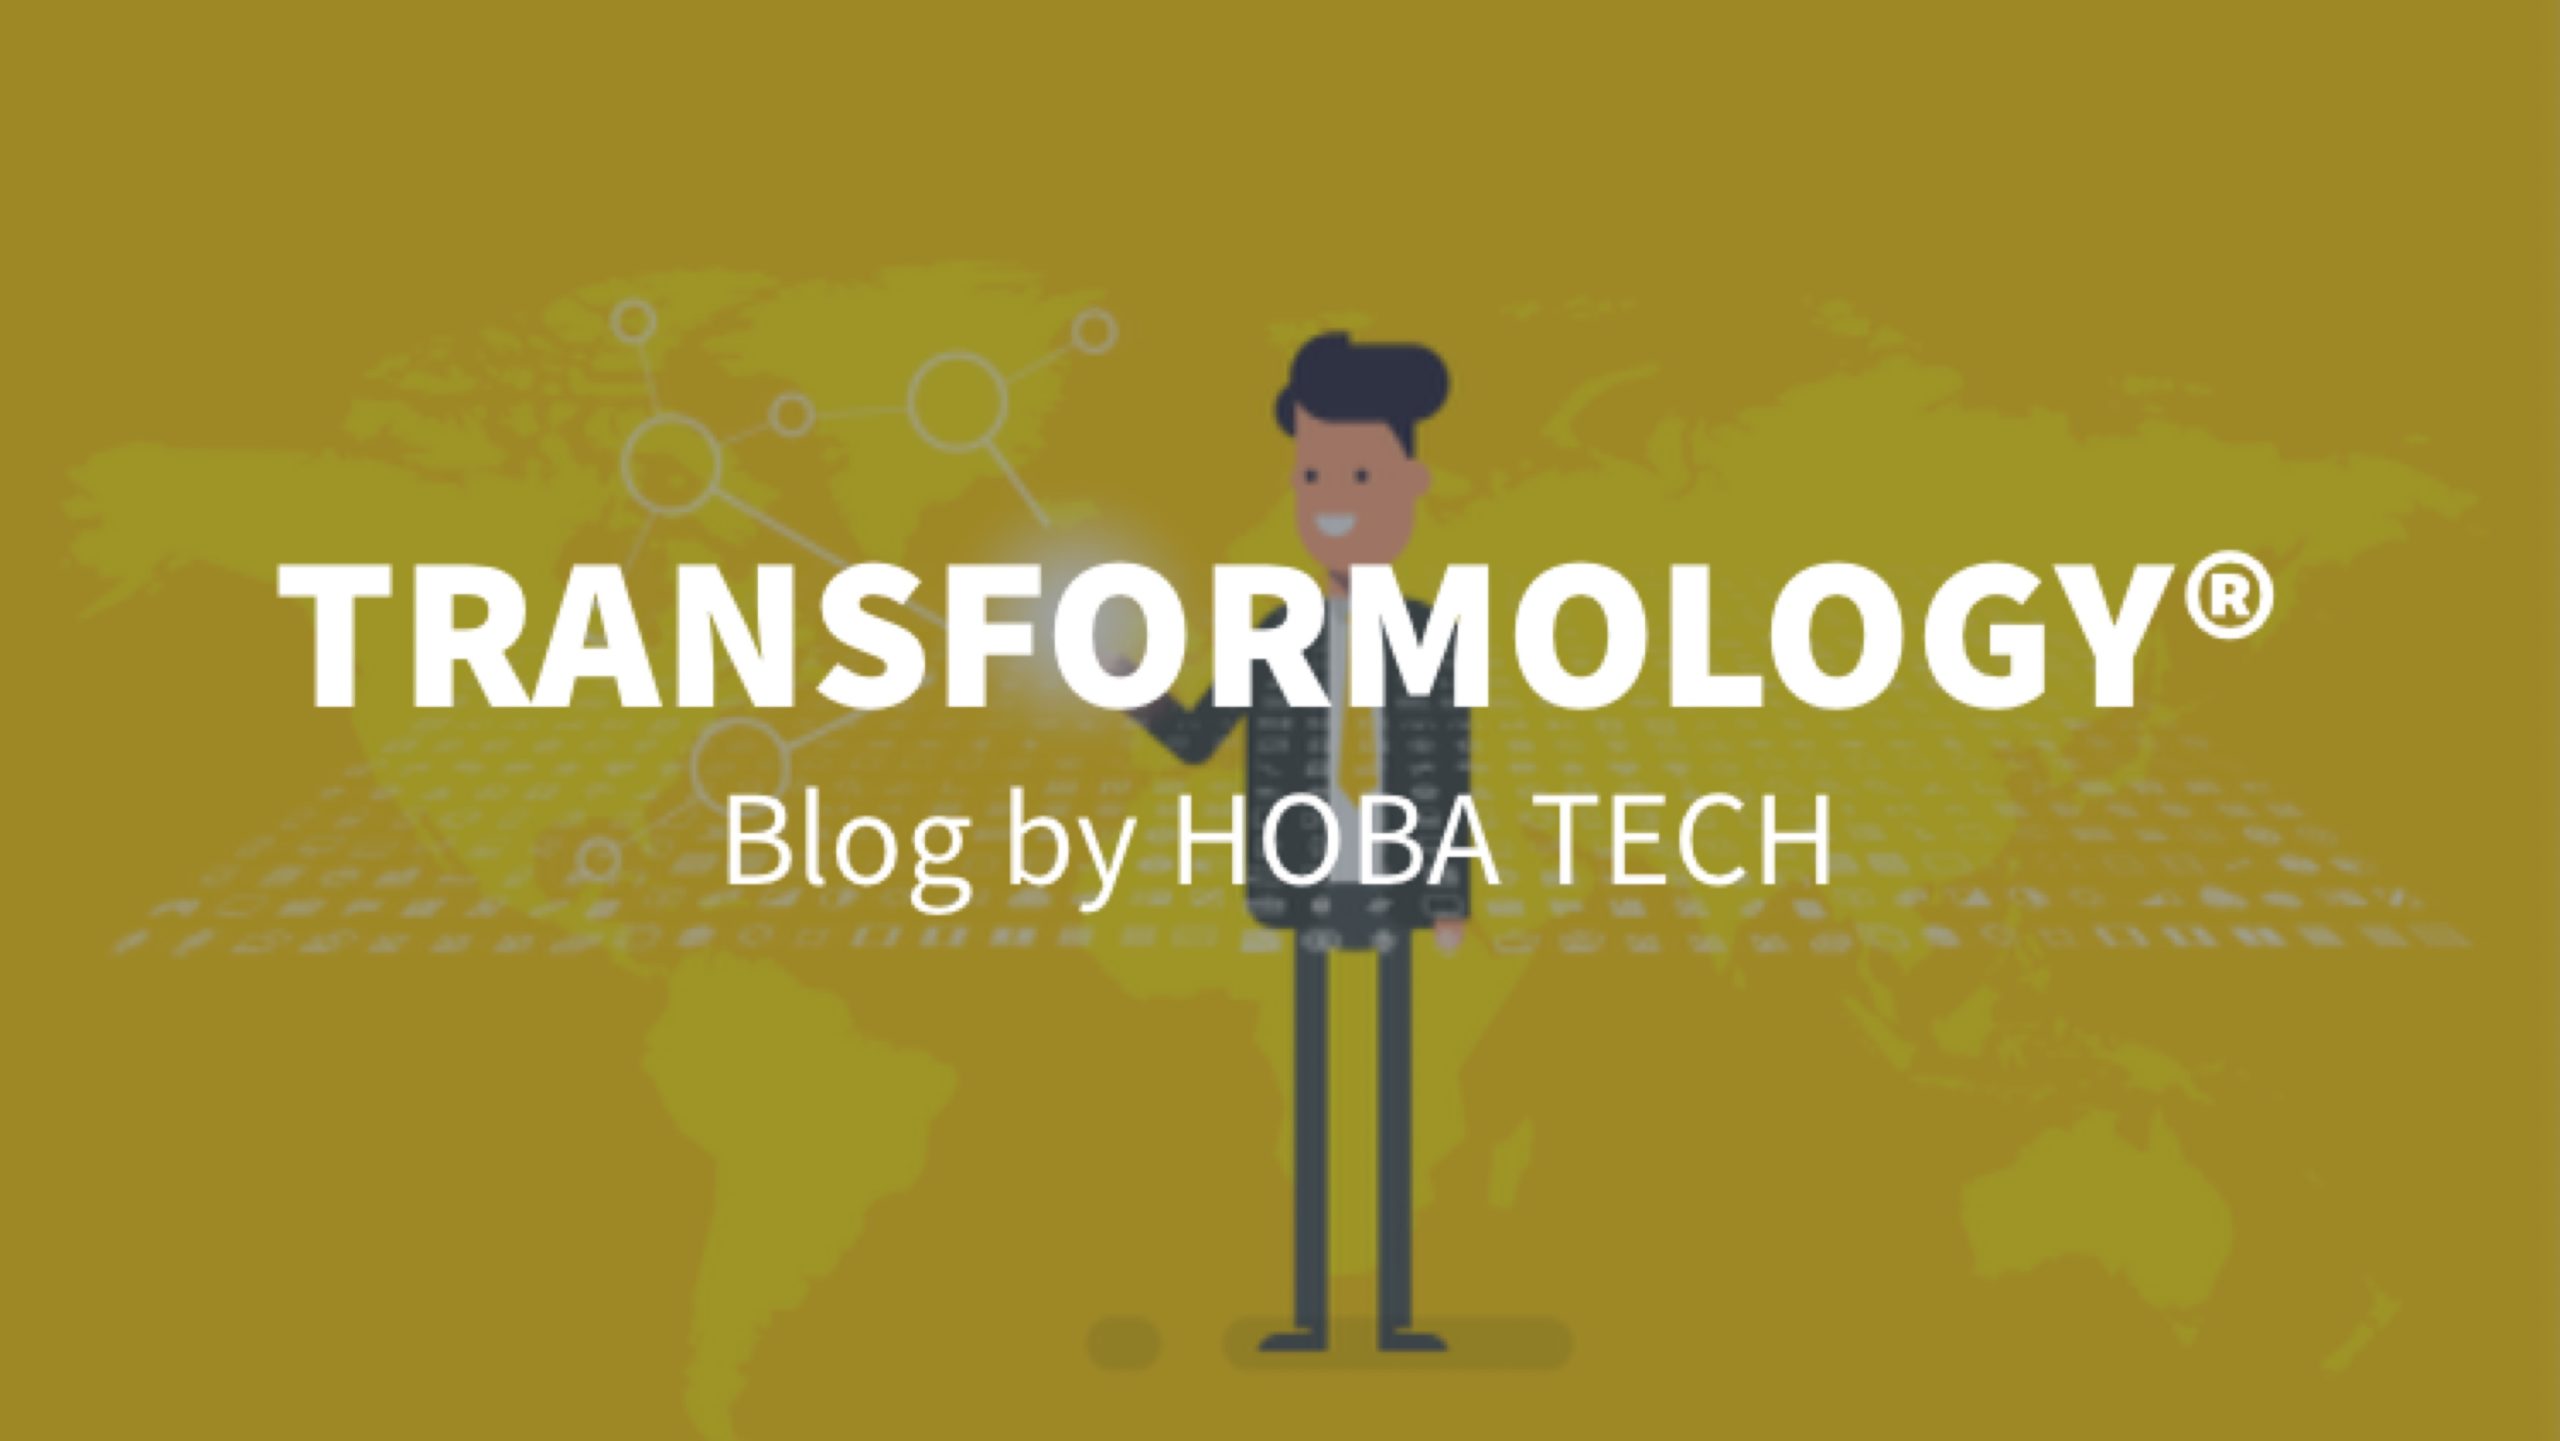 Transformology blog by HOBA TECH. Get real insights into successful  transformation from people who actually do business transformation